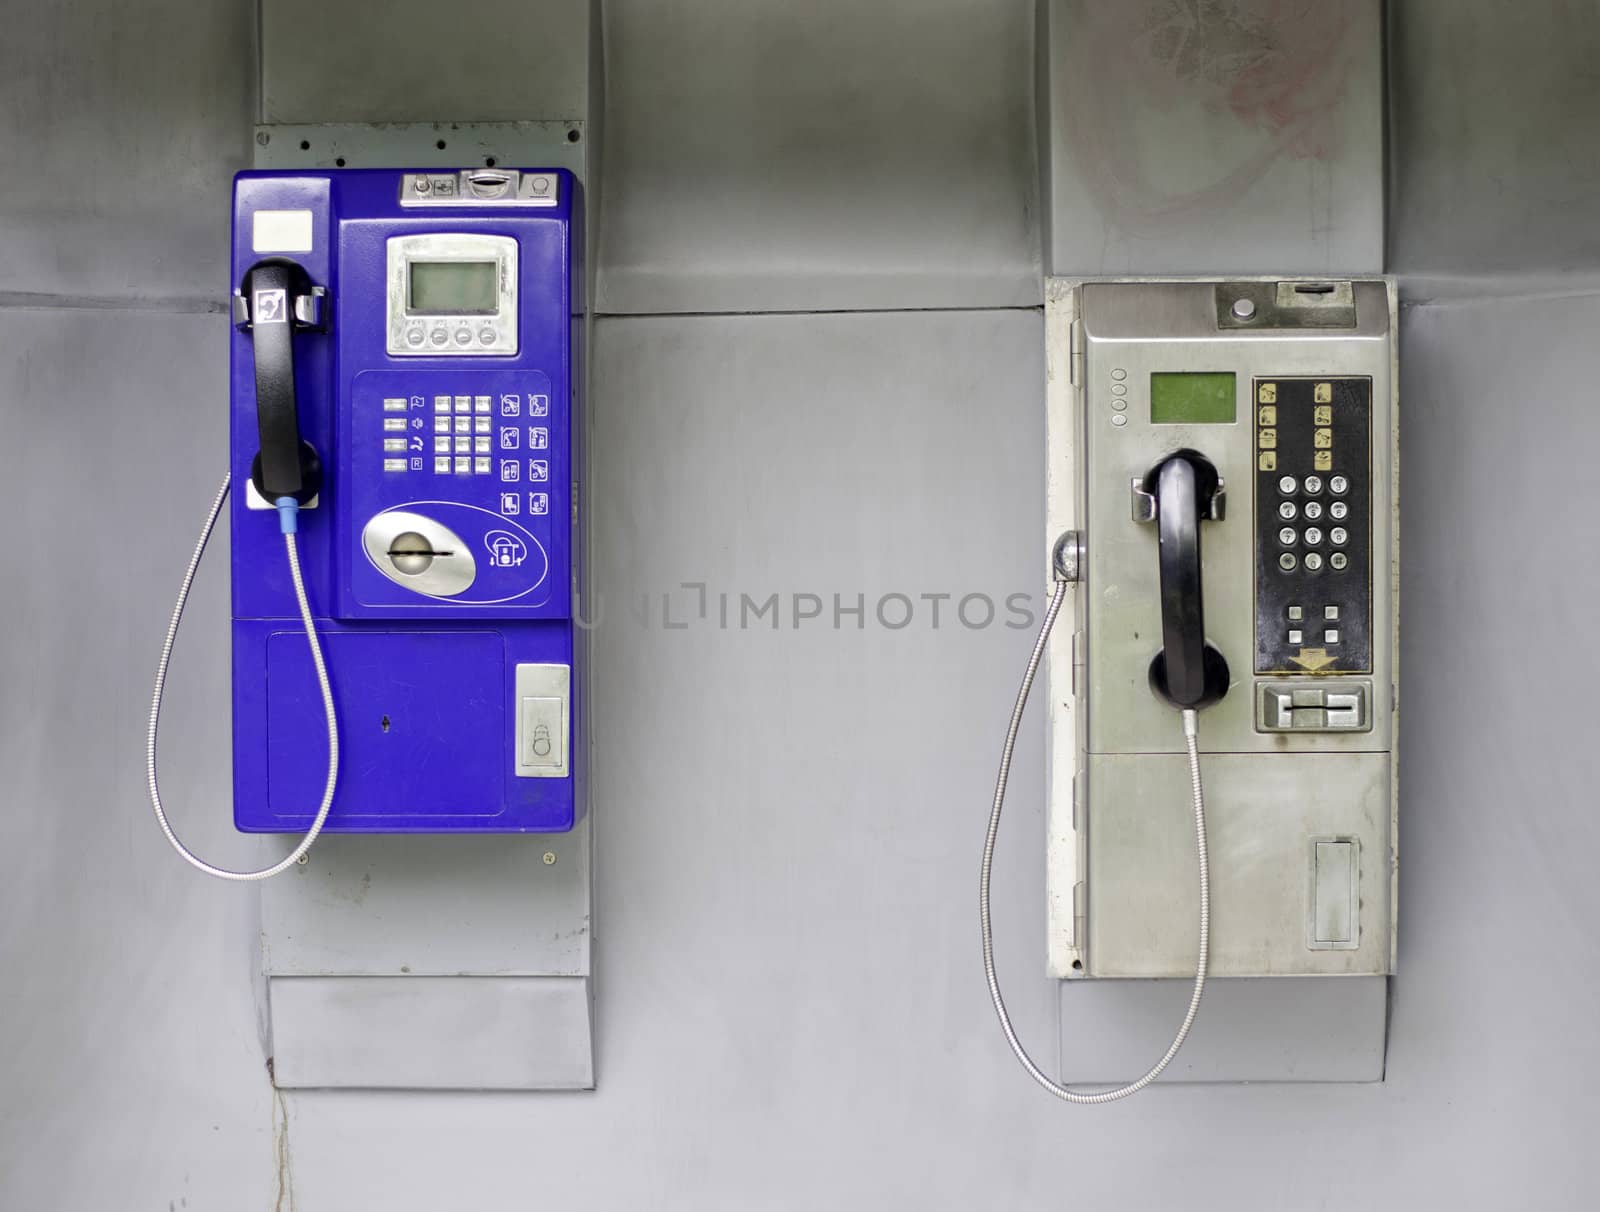 Two telephone booths in bangkok, Thailand